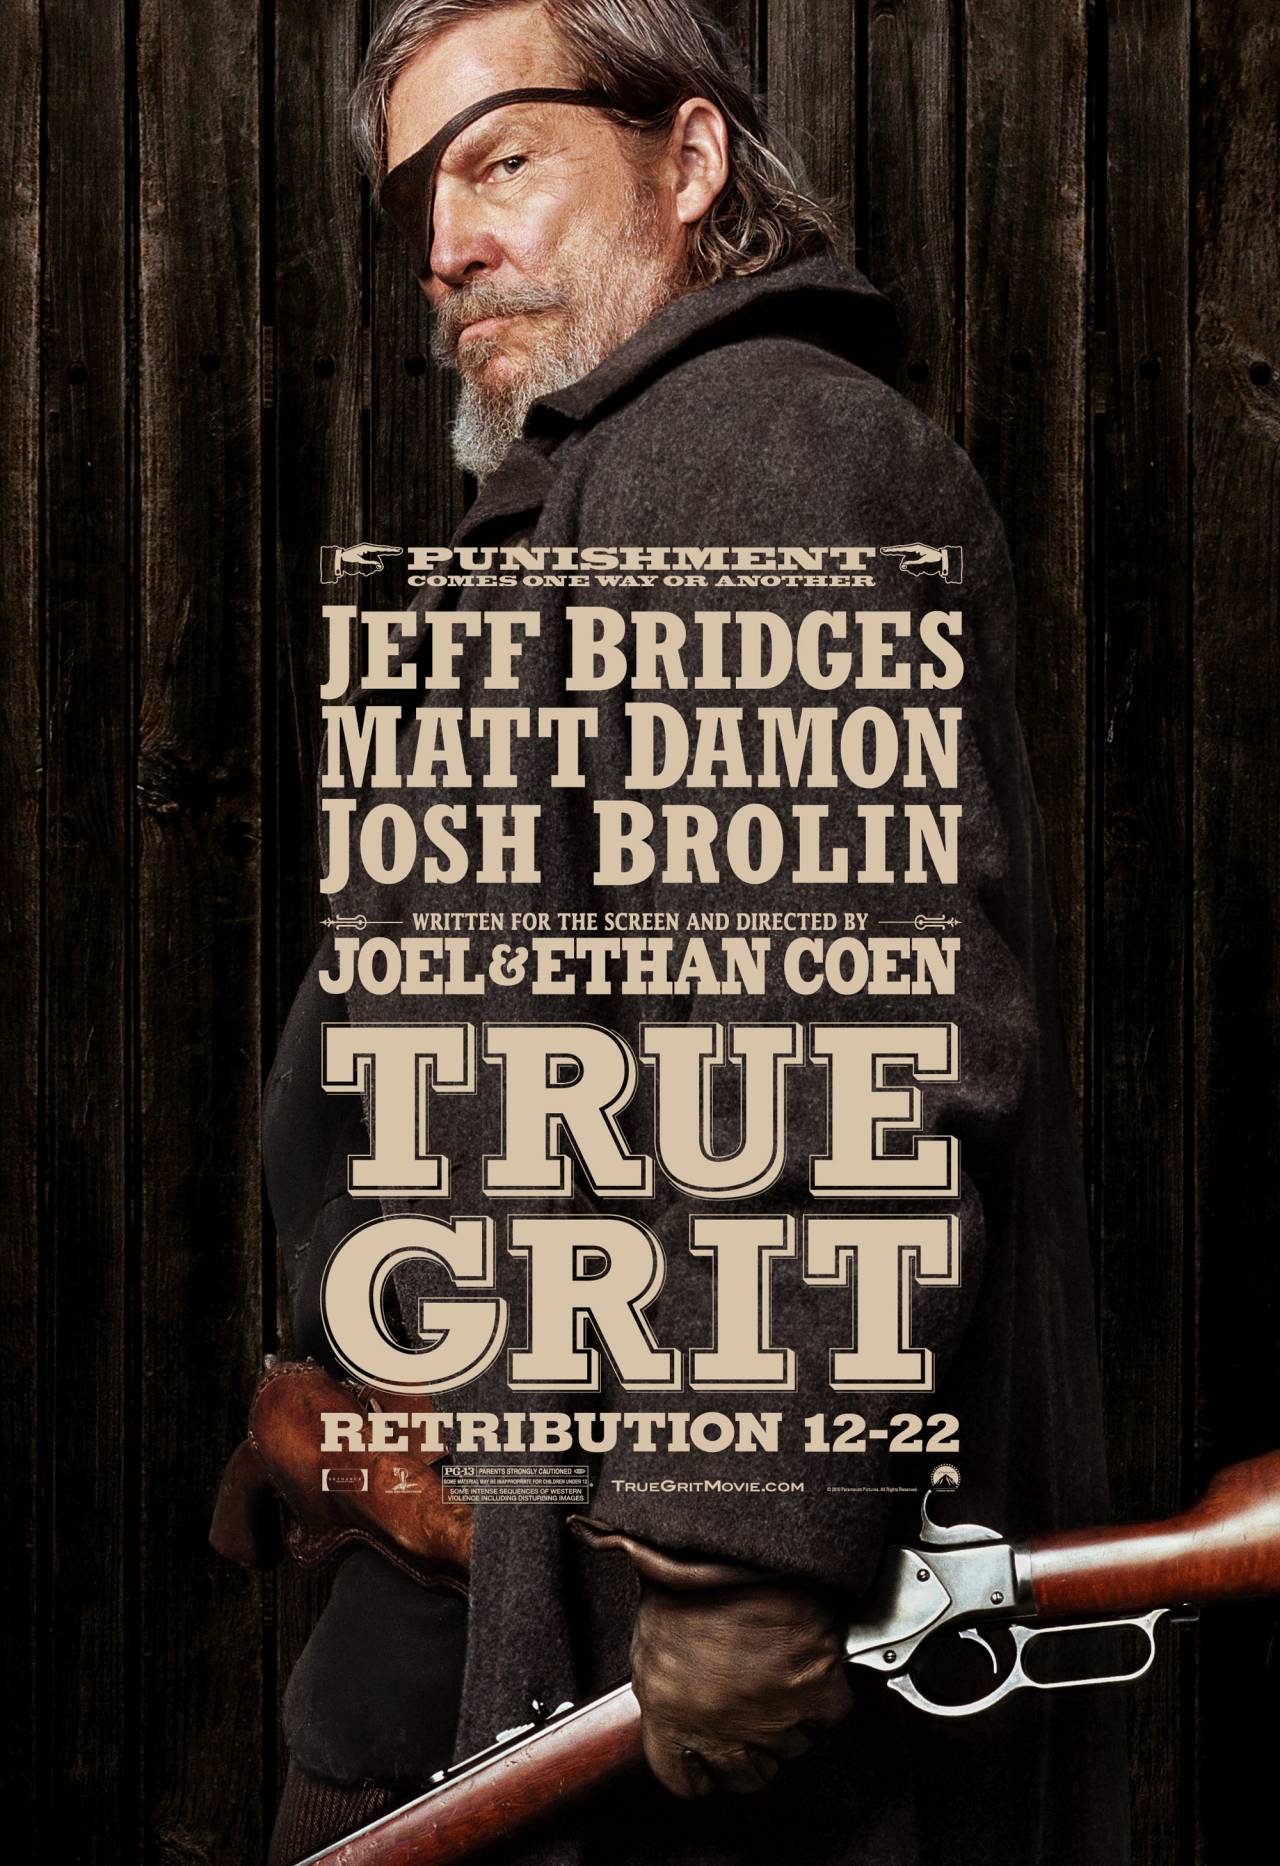 Coen-Brothers-True-Grit-Poster-2010